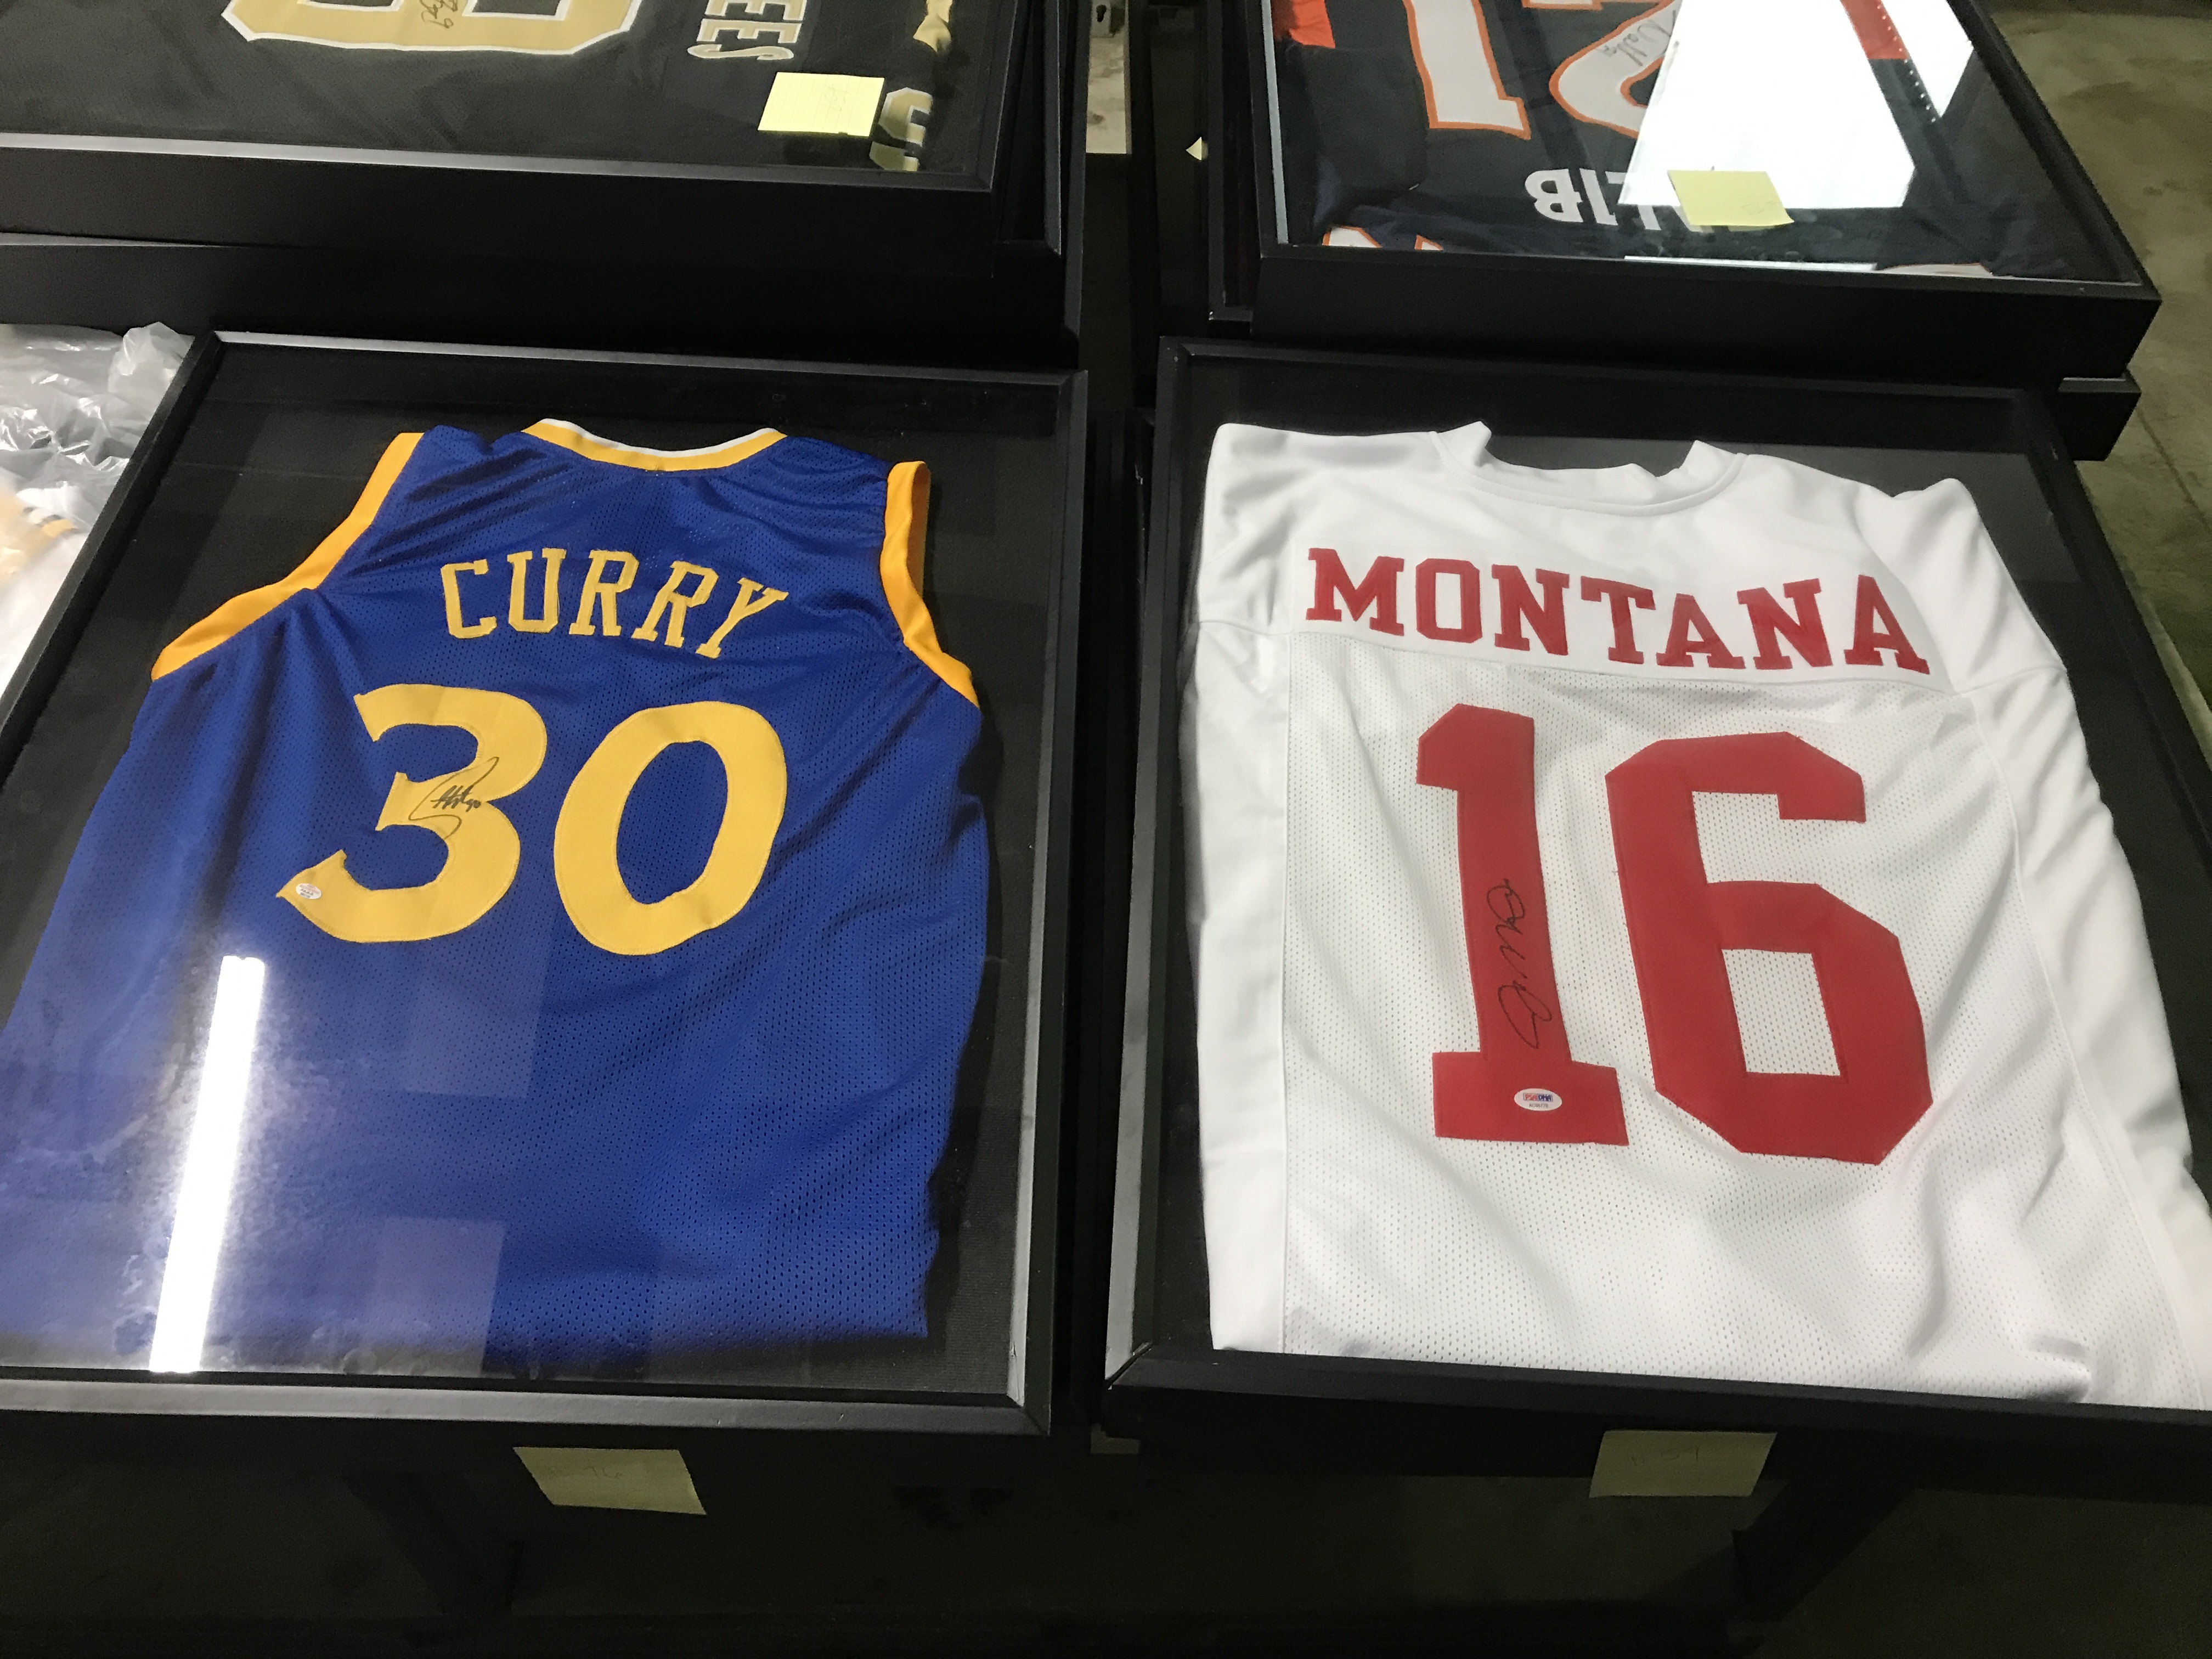 Autographed Sports Memorabilia Collection, Address Provided to Registered  Bidders - McCurdy